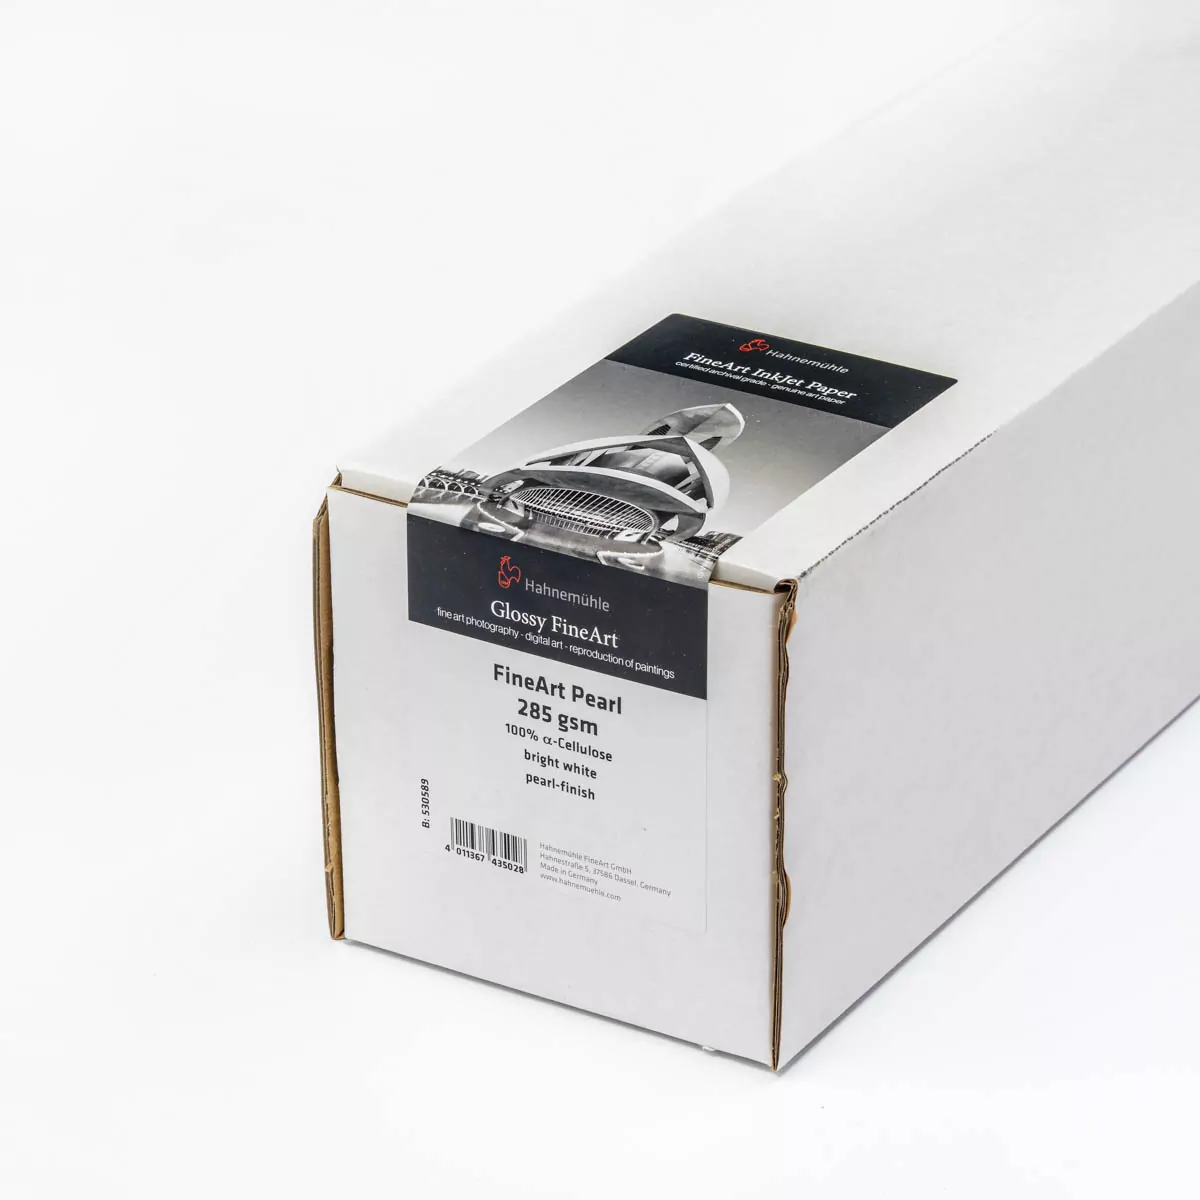 Hahnemuhle FineArt Pearl 285gsm 44”(111cm)x12m roll